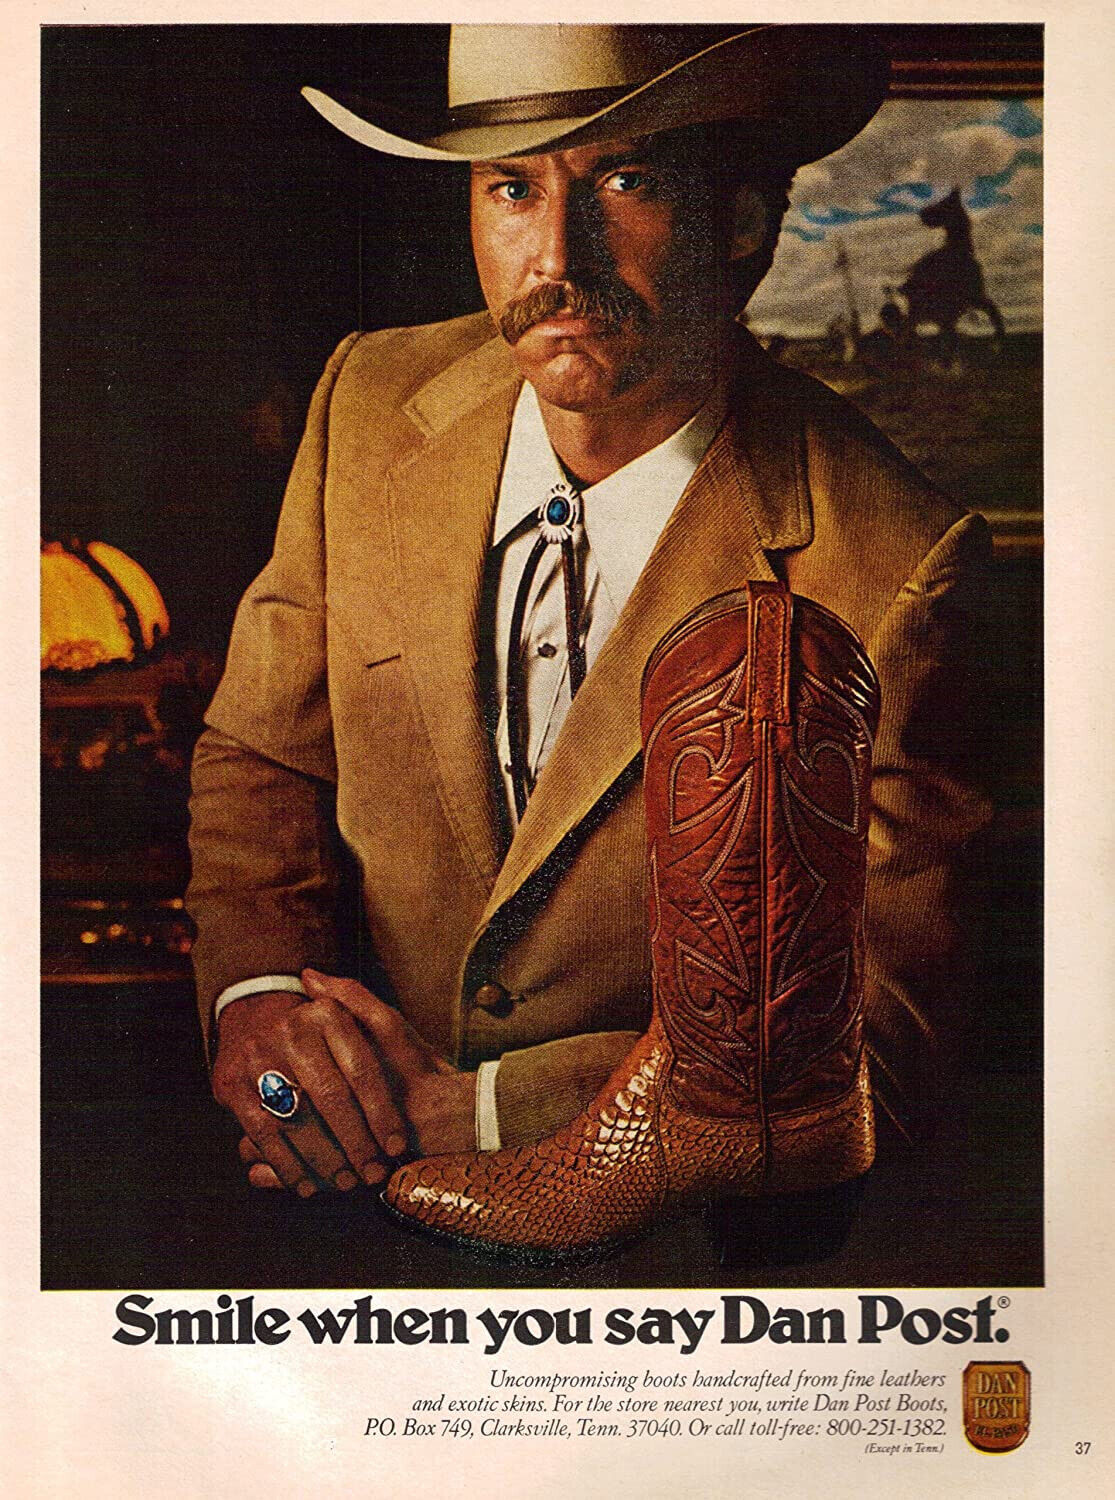 1981 Dan Post Boots - Fancy Cowboy Serious Face Smile When Say - Print Ad Photo